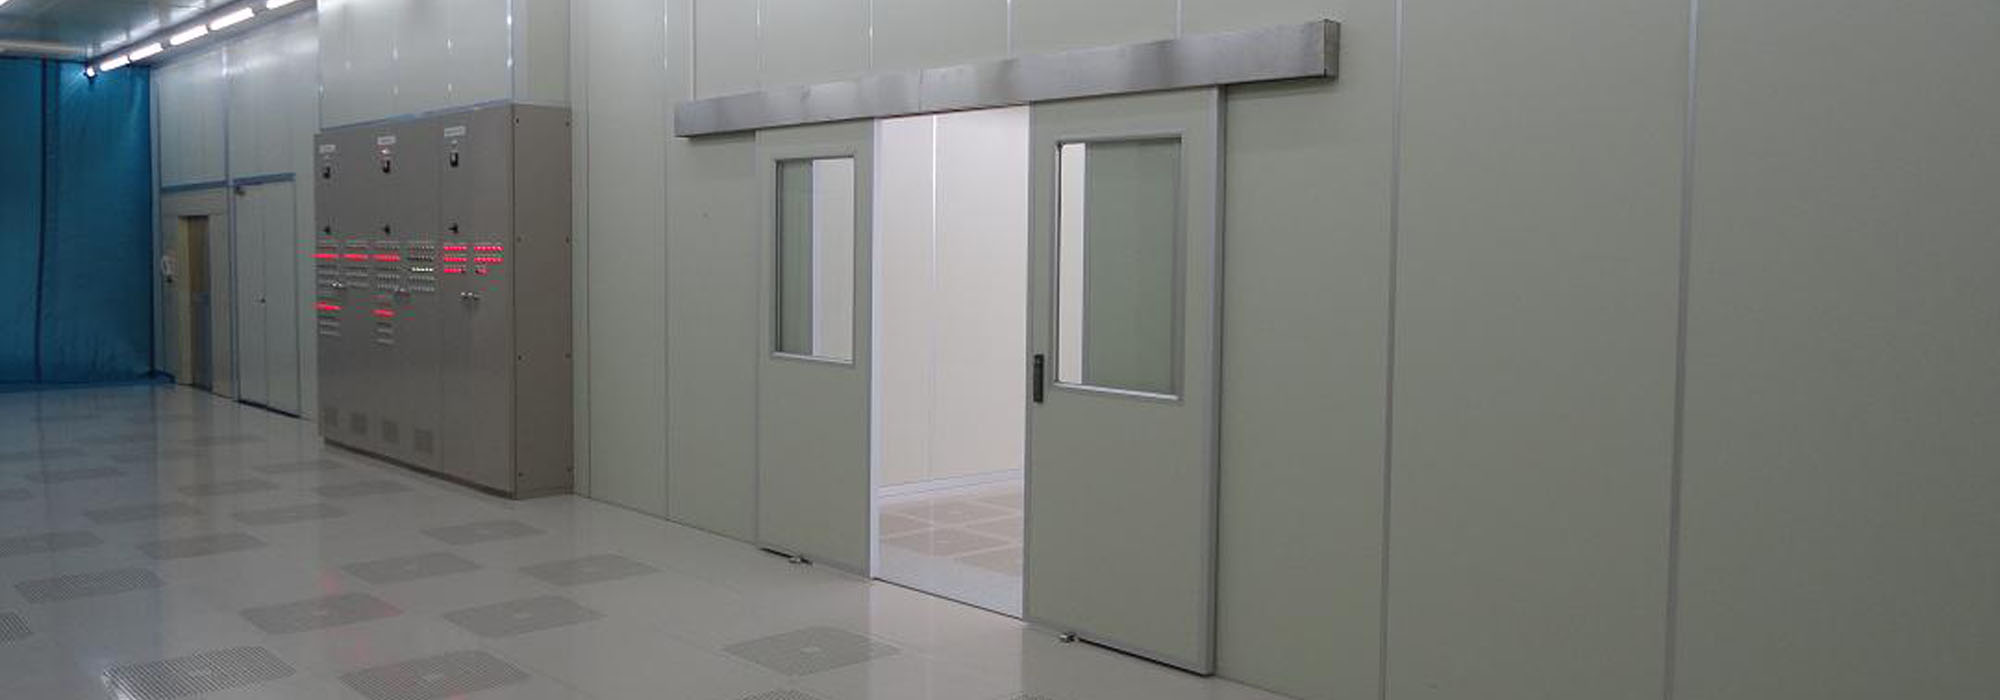 Magnetic Linear ( Automatic Sliding Door )